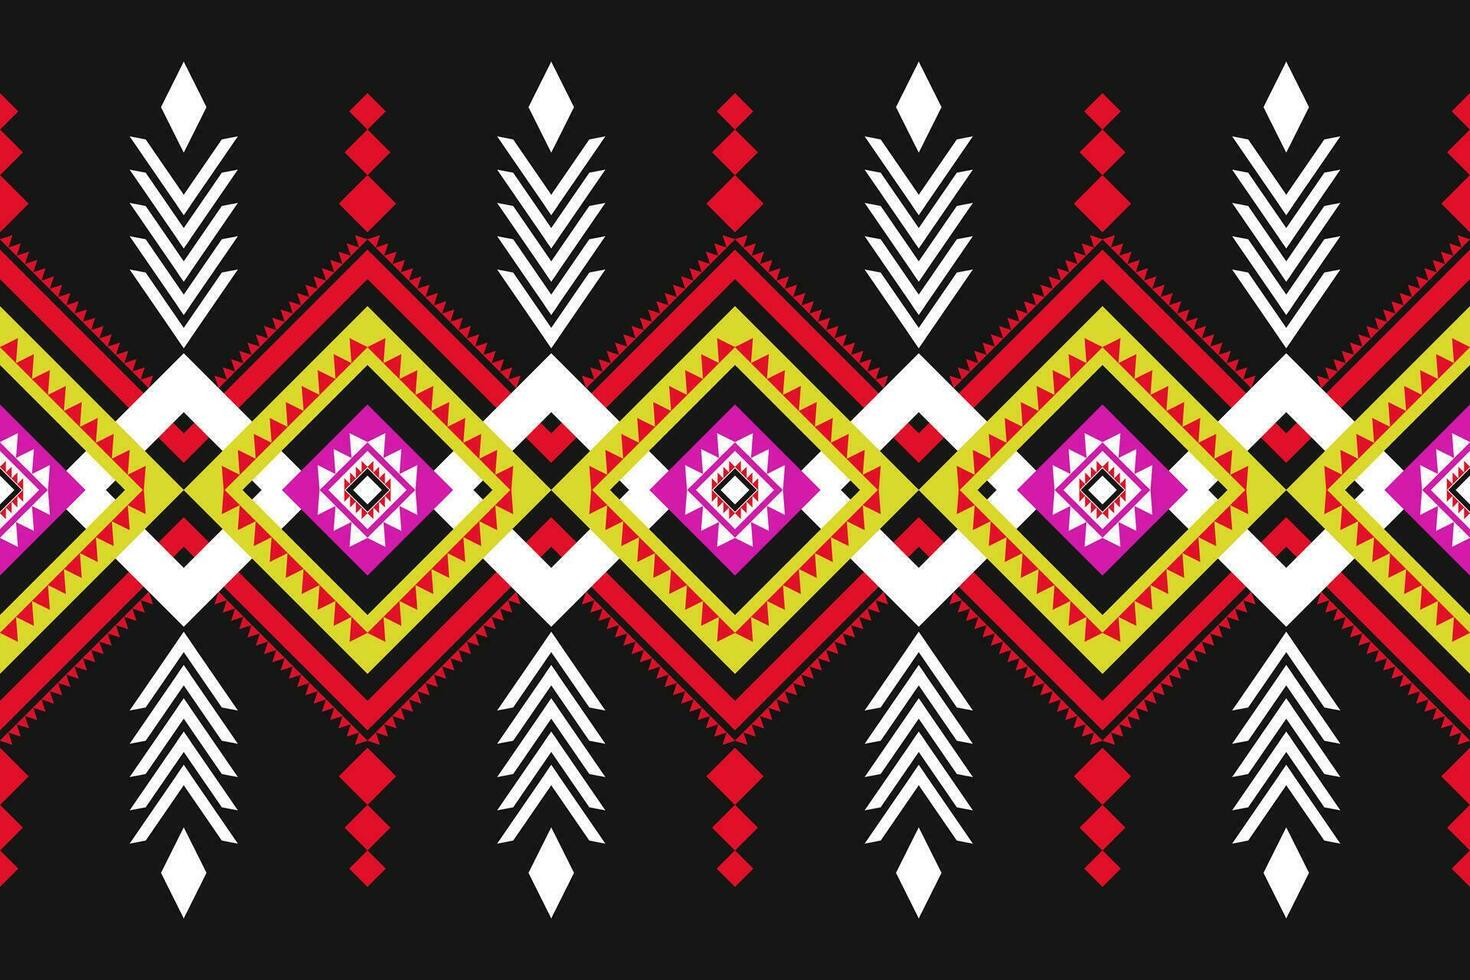 Oriental geometric ethnic pattern Can be used in fabric design for background, wallpaper, carpet, textile, clothing, wrapping, decorative paper, embroidery illustration vector. vector